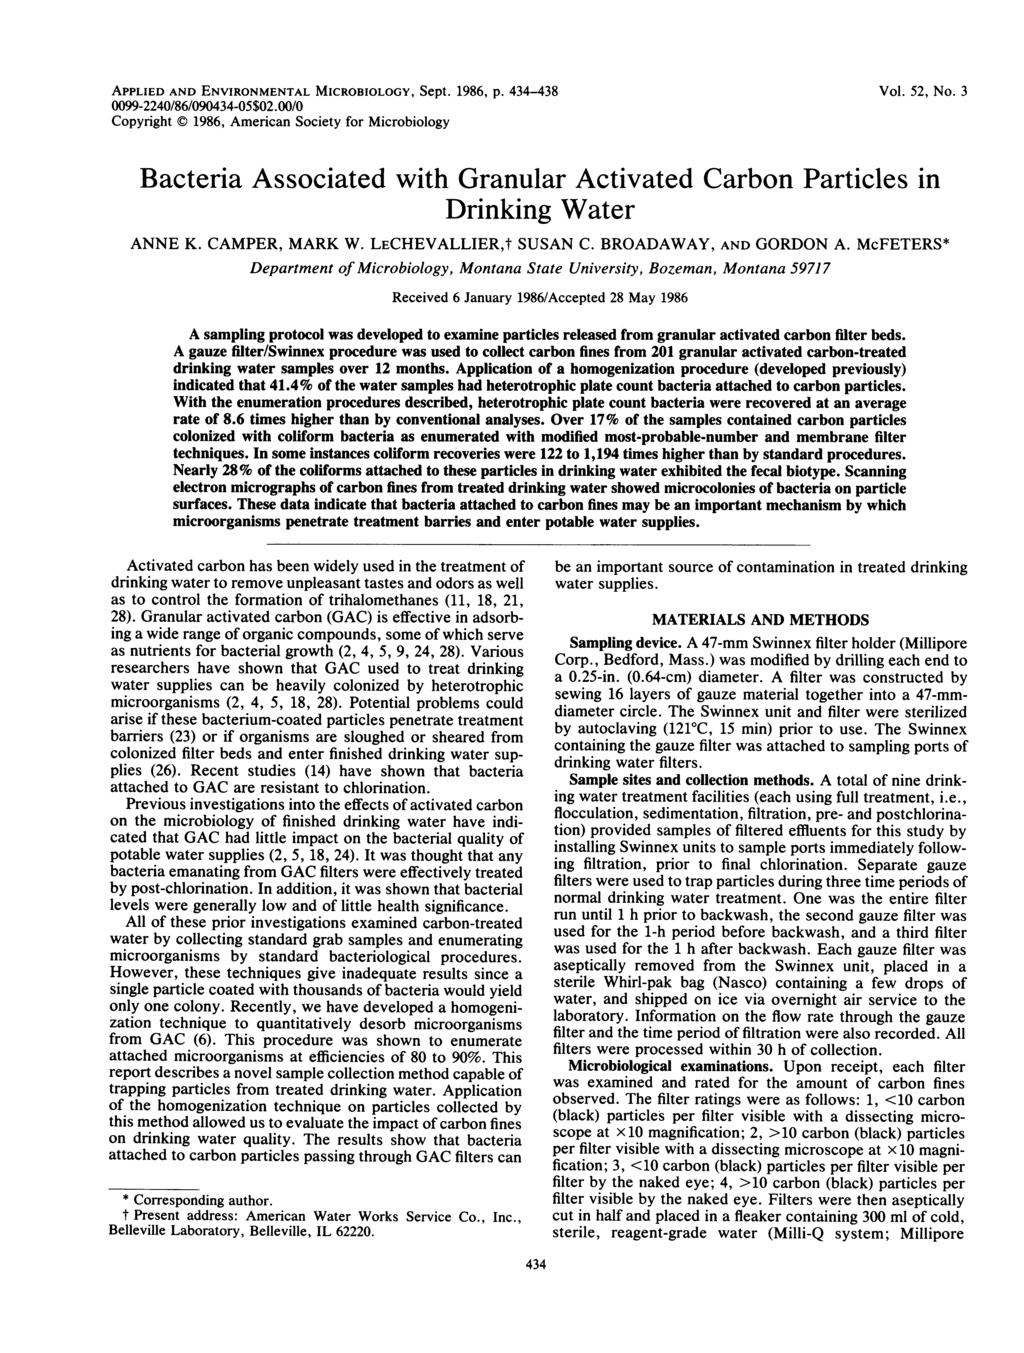 APPLIED AND ENVIRONMENTAL MICROBIOLOGY, Sept. 1986, p. 434-438 0099-2240/86/090434-05$02.00/0 Copyright 1986, Americn Society for Microbiology Vol. 52, No.